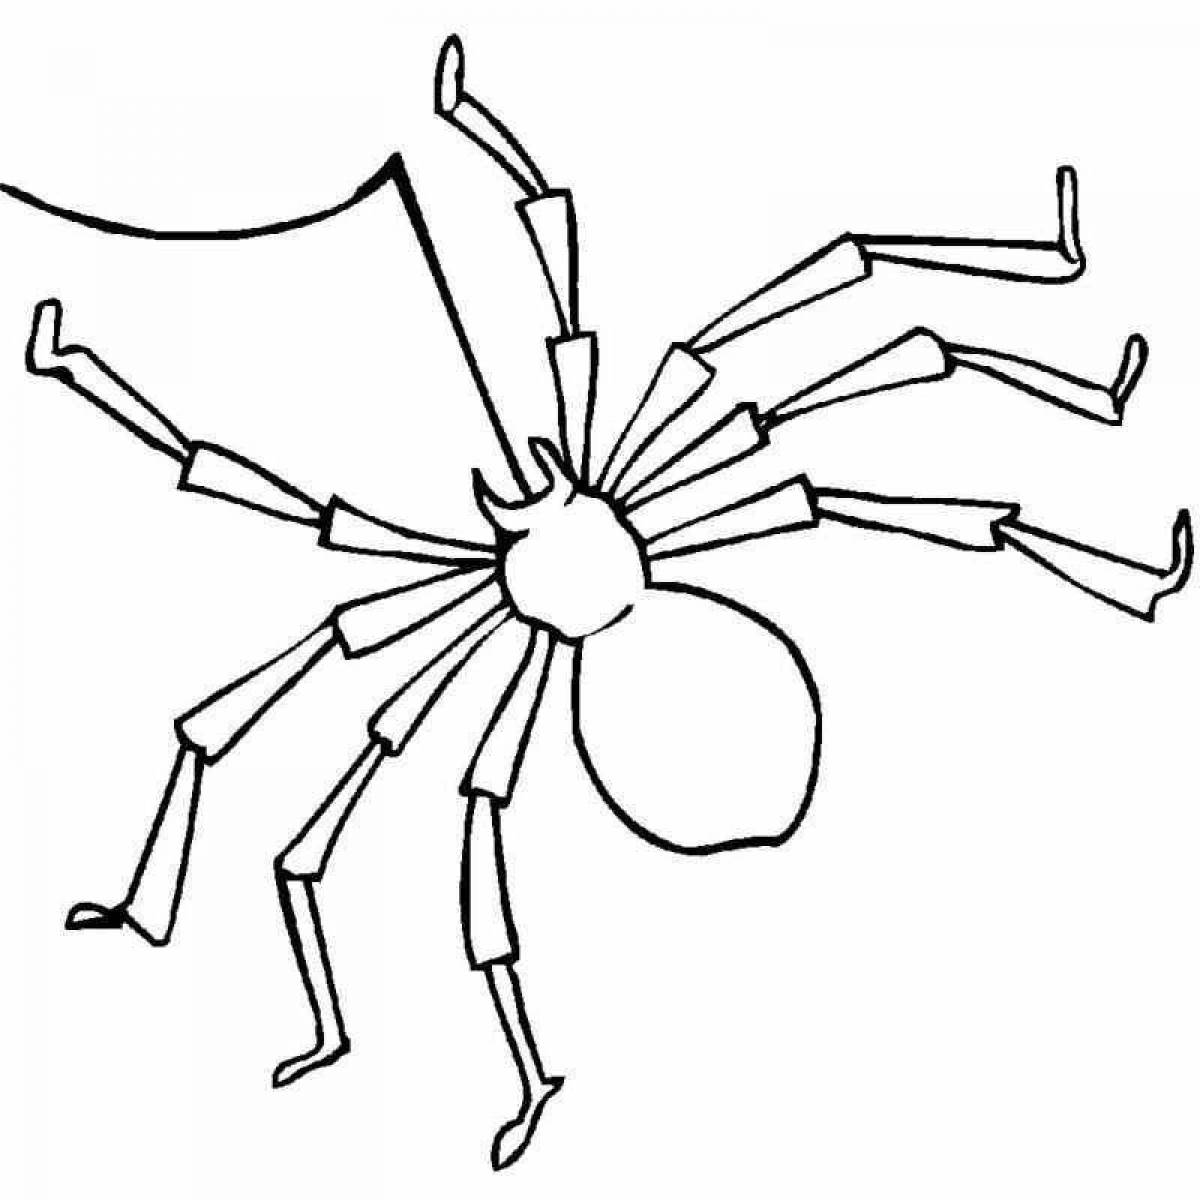 Fun coloring book spider for kids